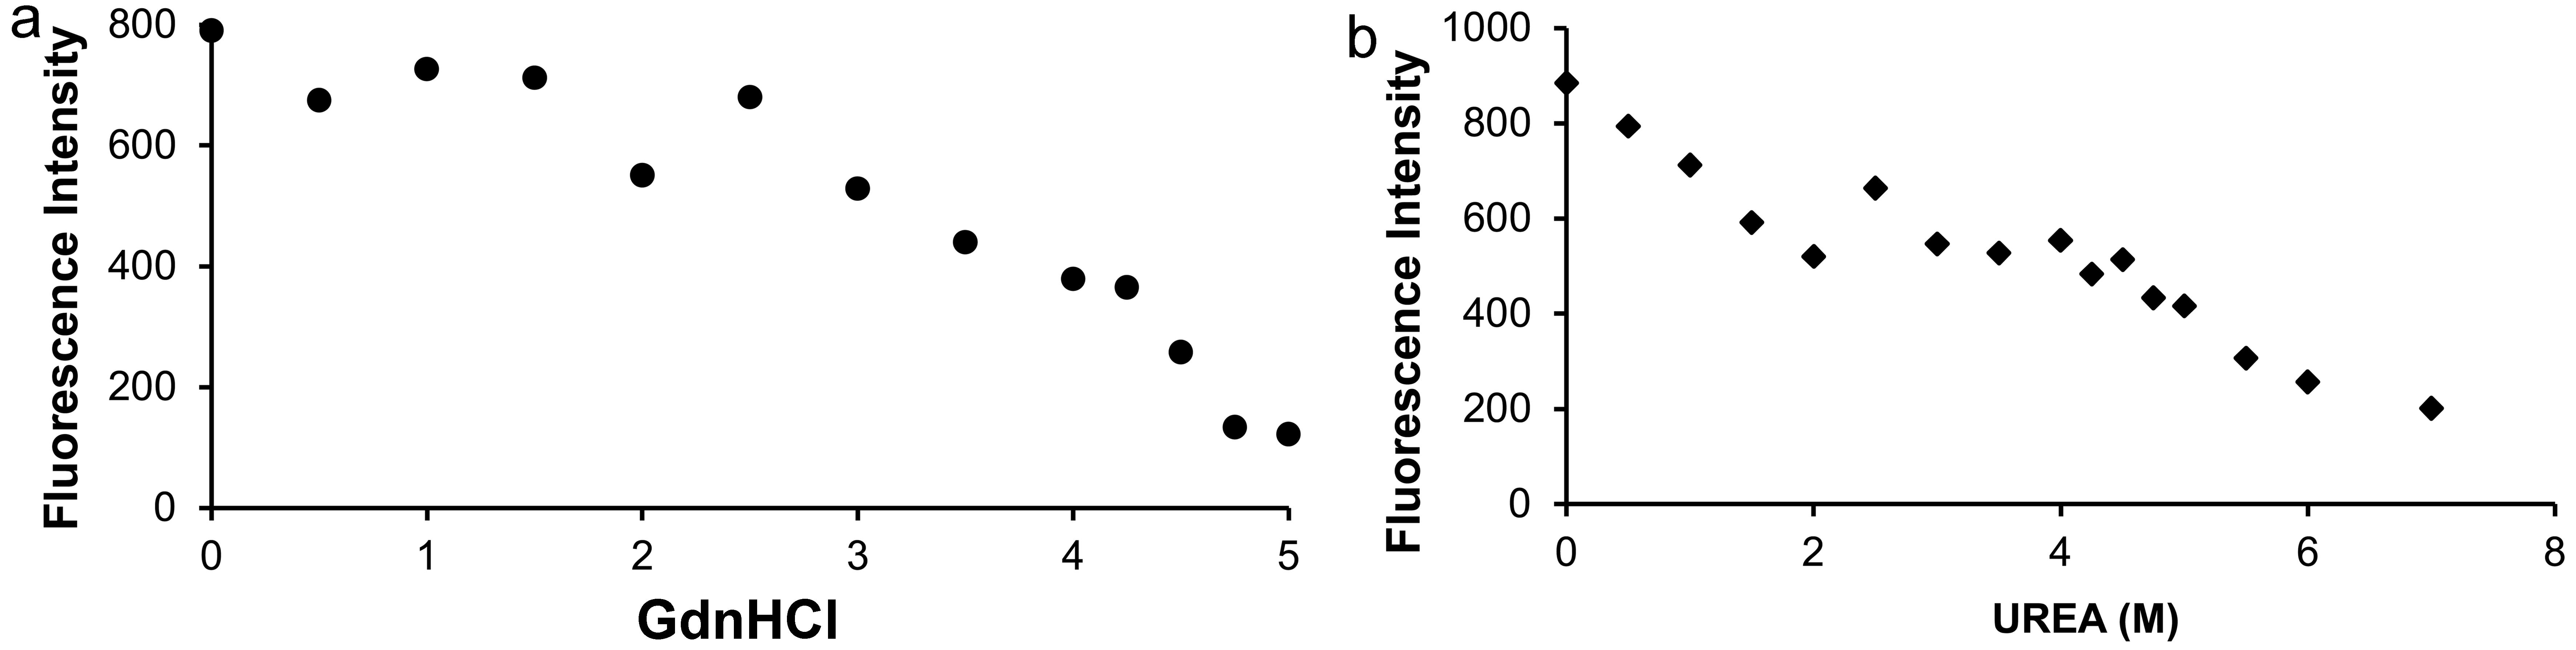 <italic>CRP<sub>Mt</sub></italic> unfolding and ANS binding. The graph representing ANS binding (represented by the change in fluorescence intensity at 490 nm) at increasing concentrations of (a) GdnHCl and (b) urea.